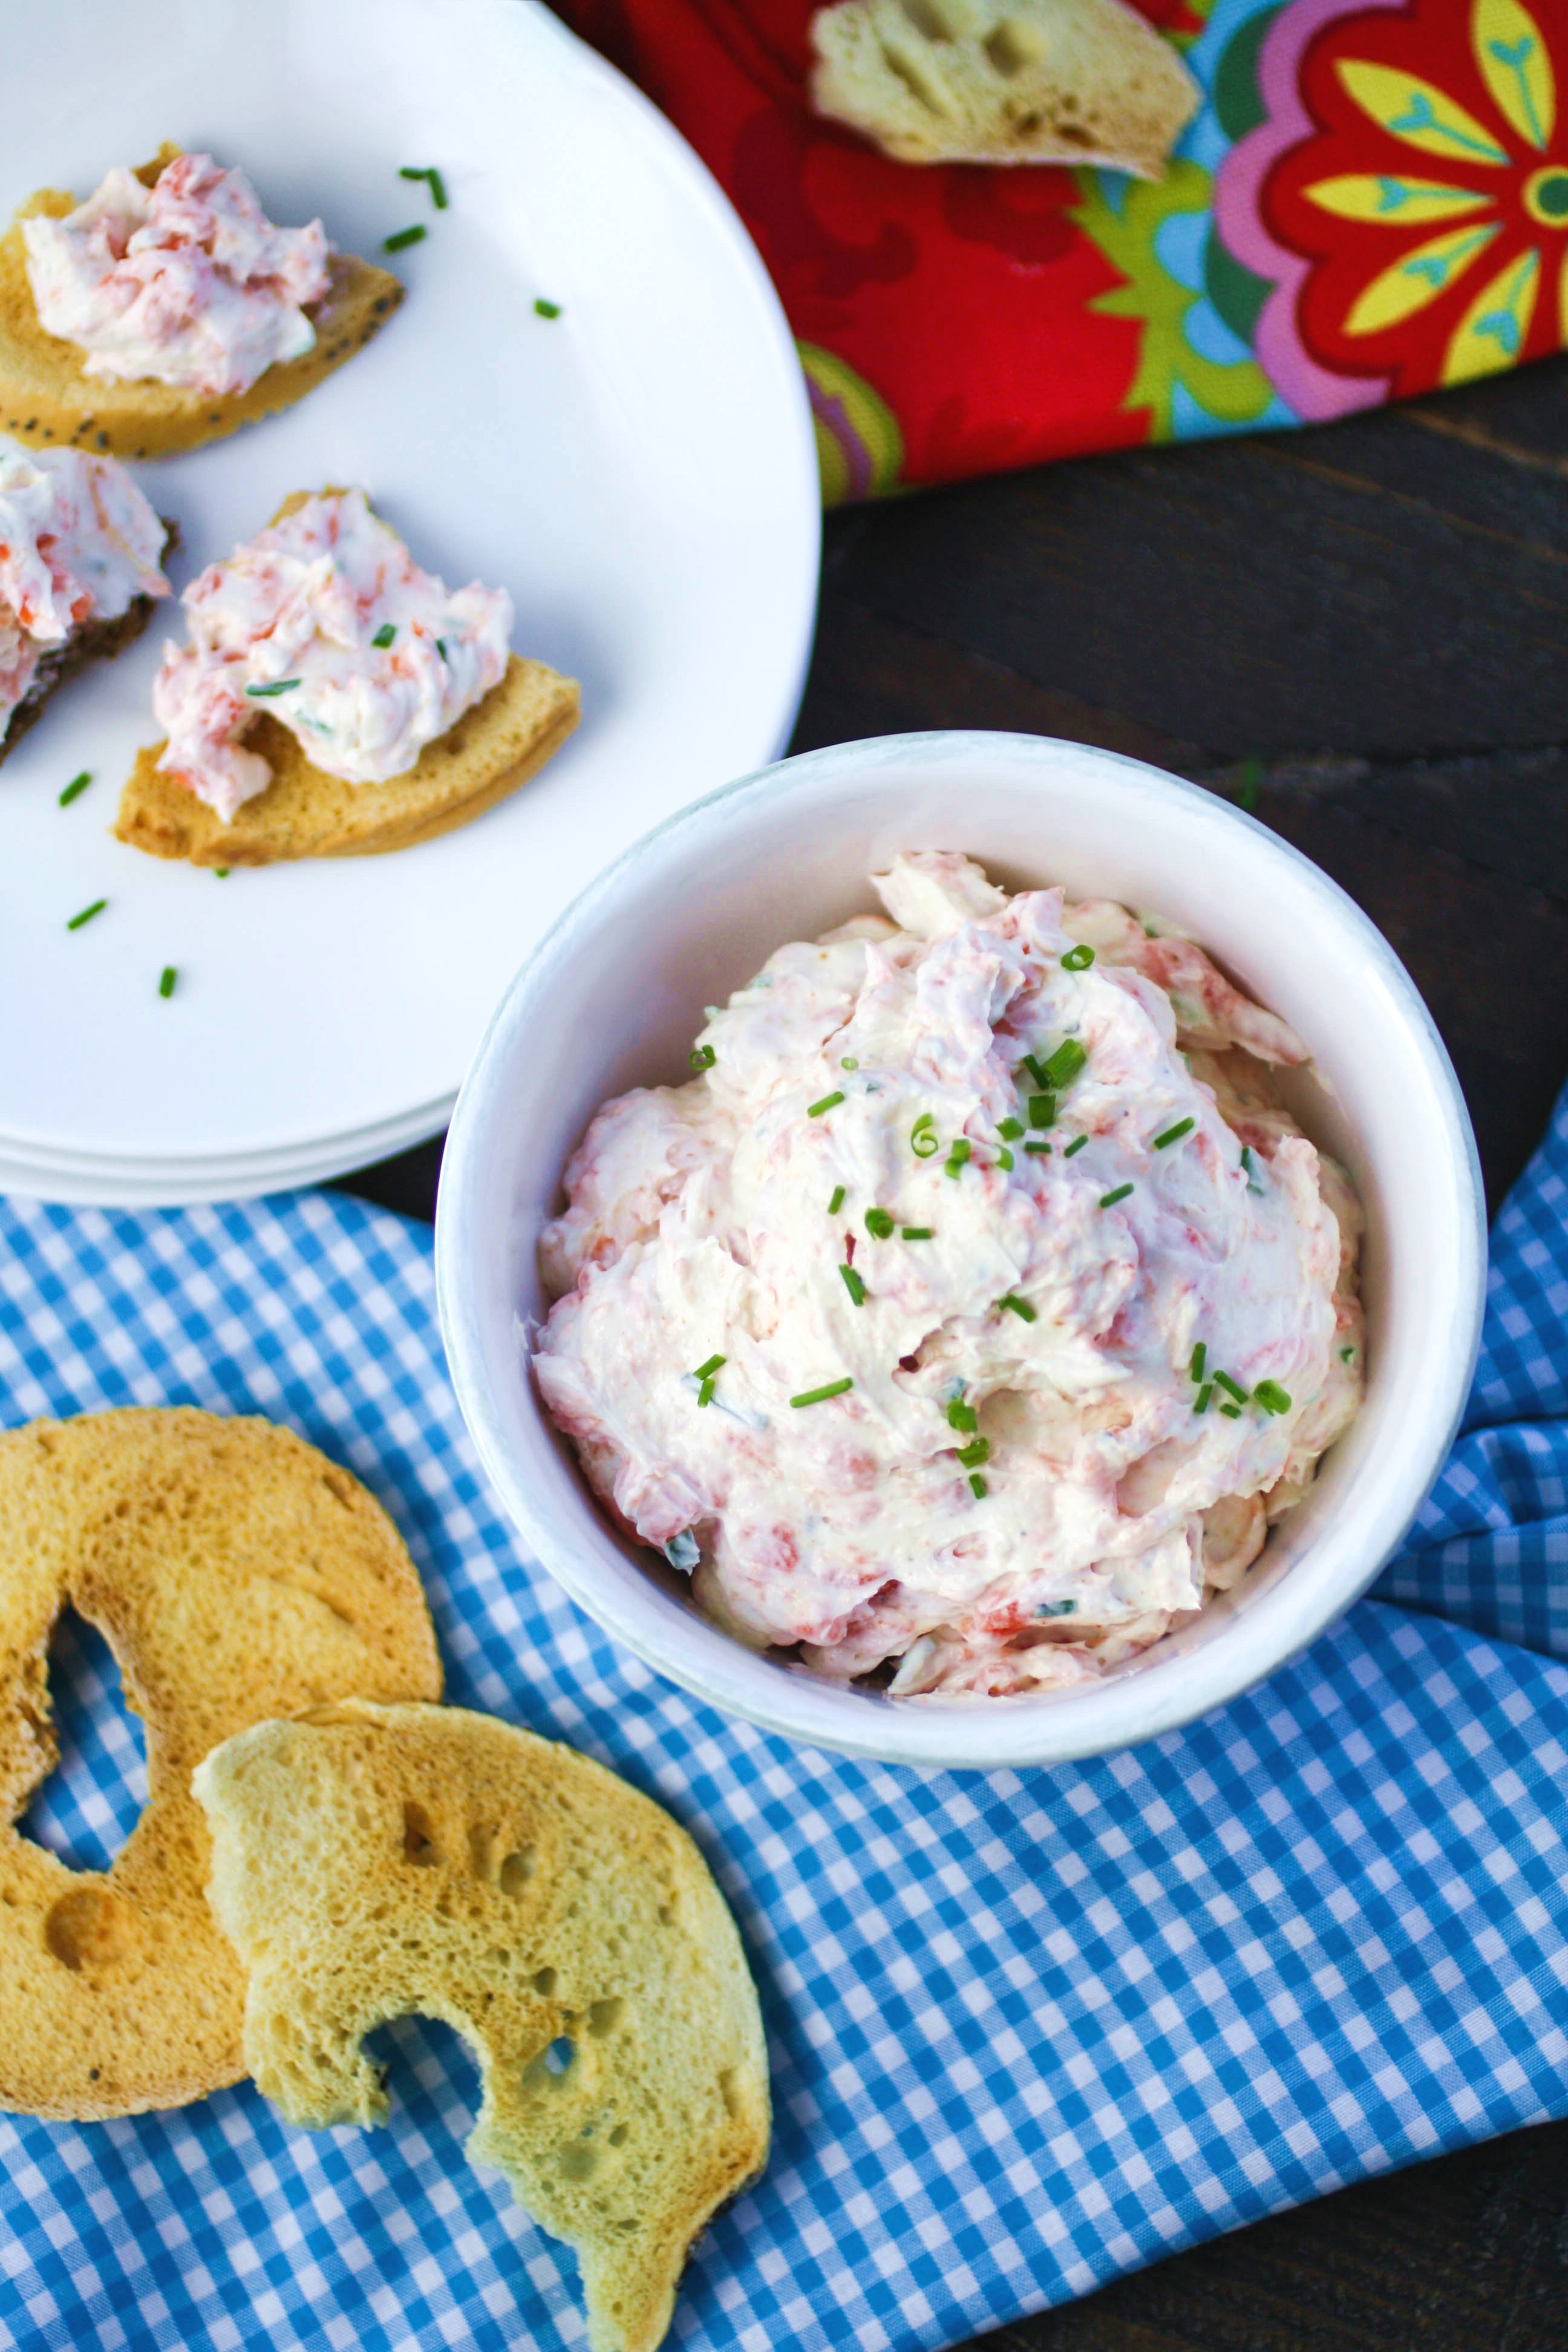 Simple Smoked Salmon Spread is a great treat for any get together. You'll love how easy it is to make this salmon spread!